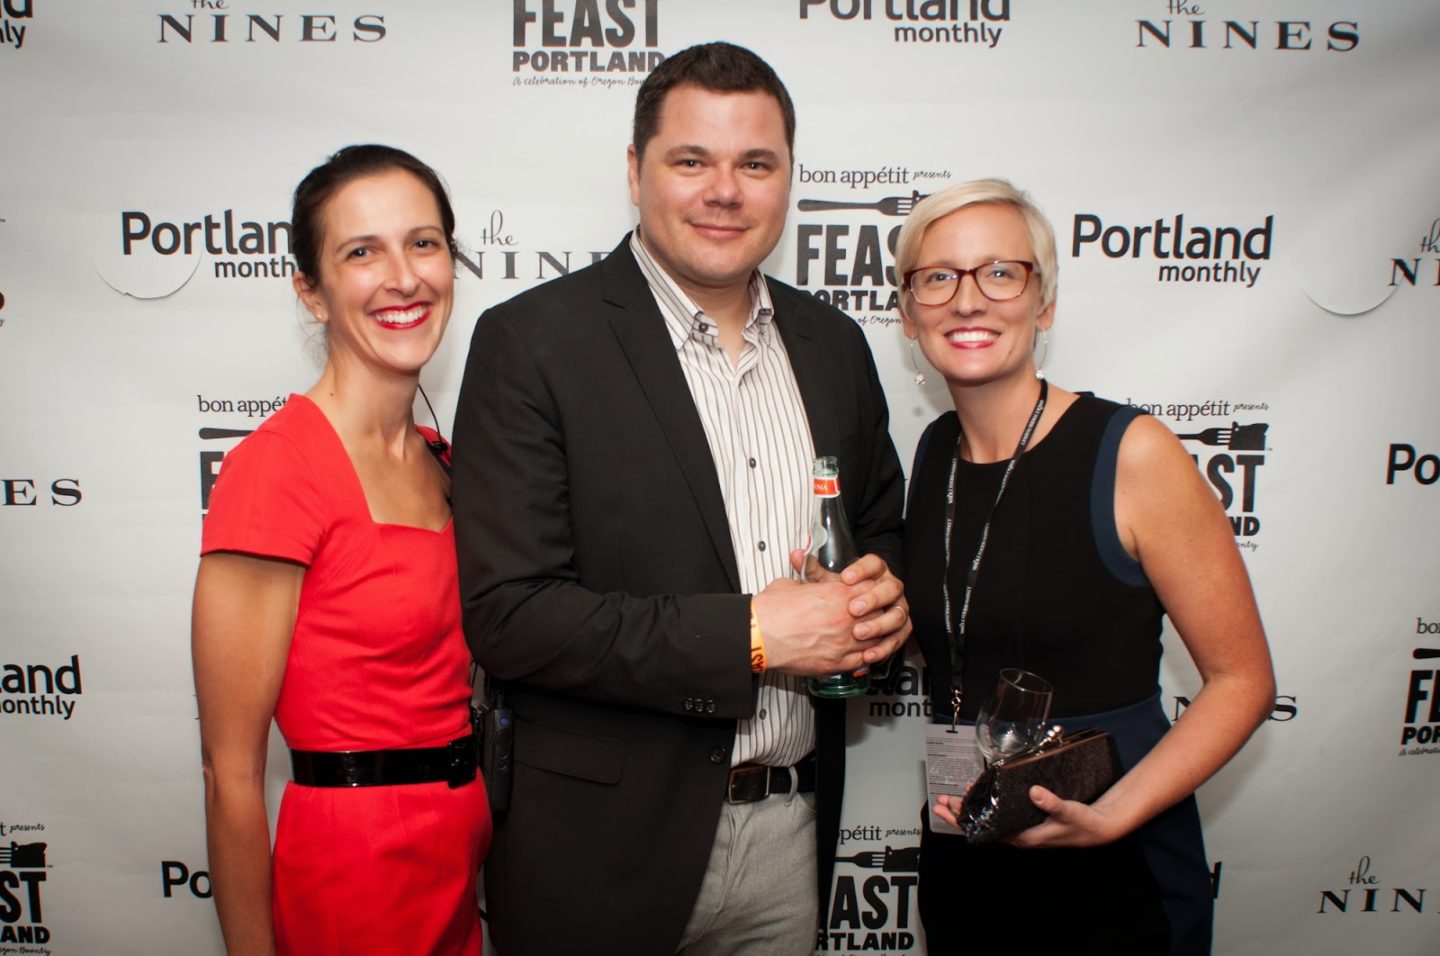 Coffee Conversations: Carrie Welch Co-Founder of Feast Portland